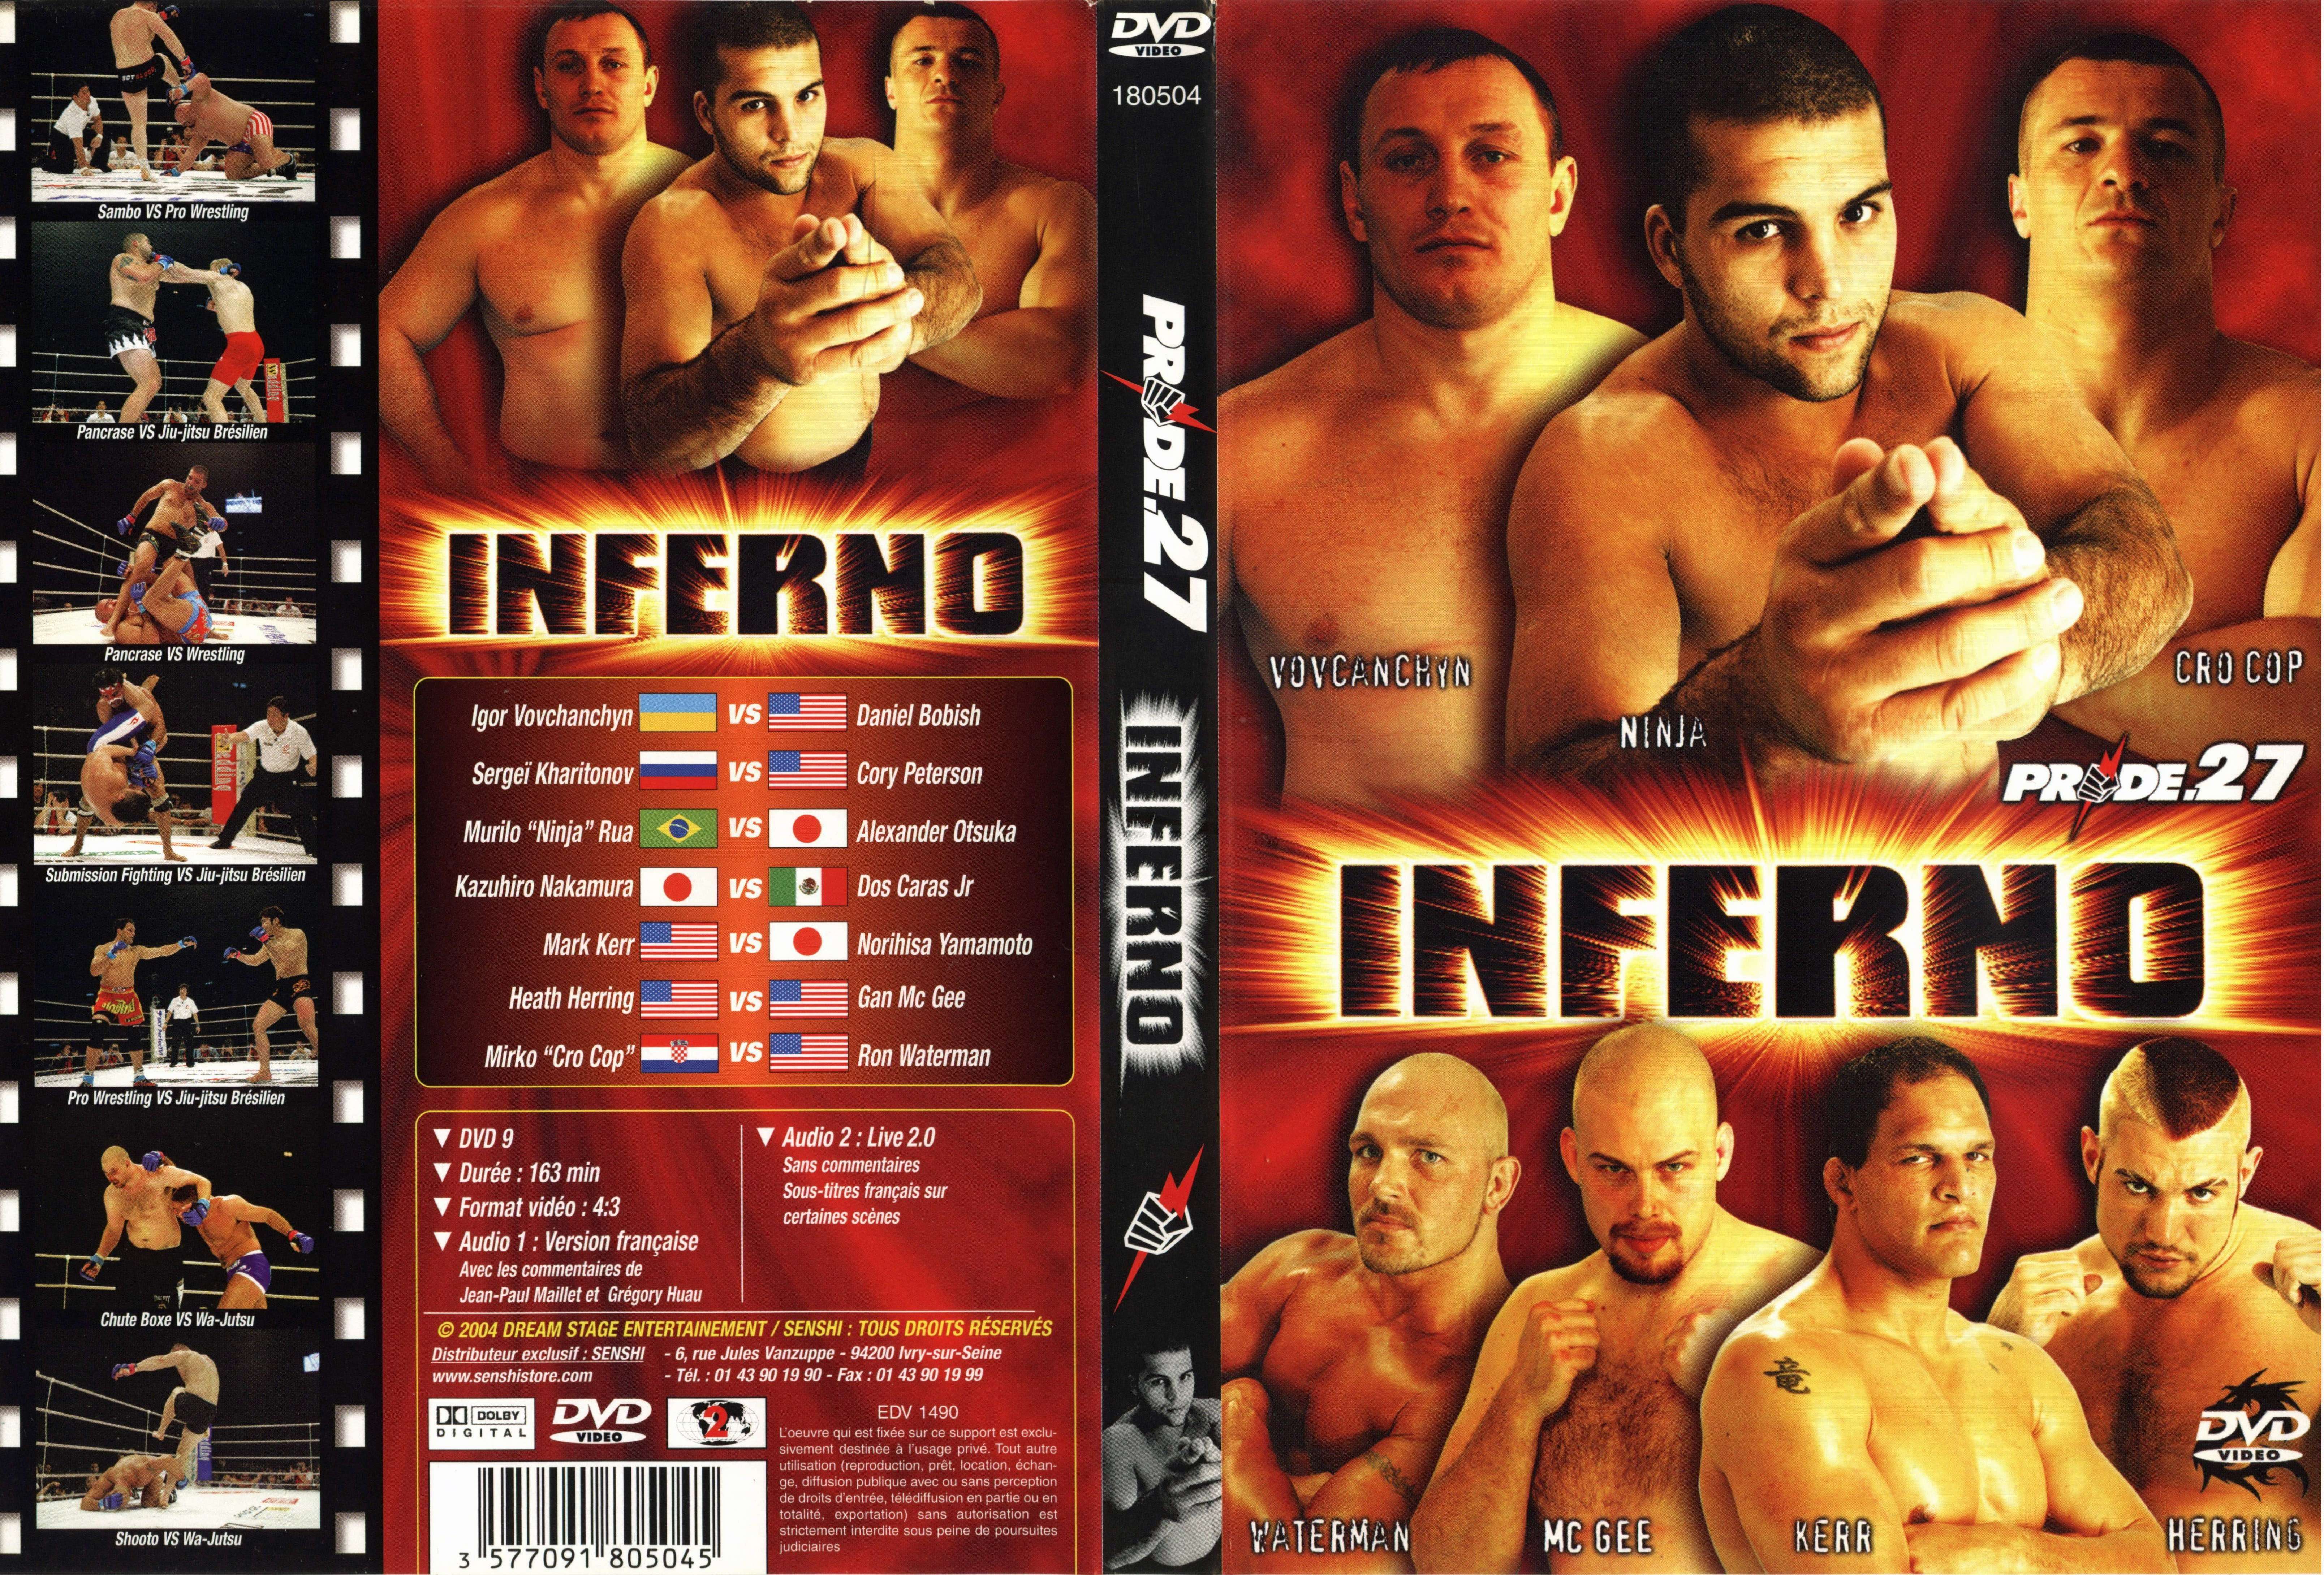 Jaquette DVD Prode 27 inferno